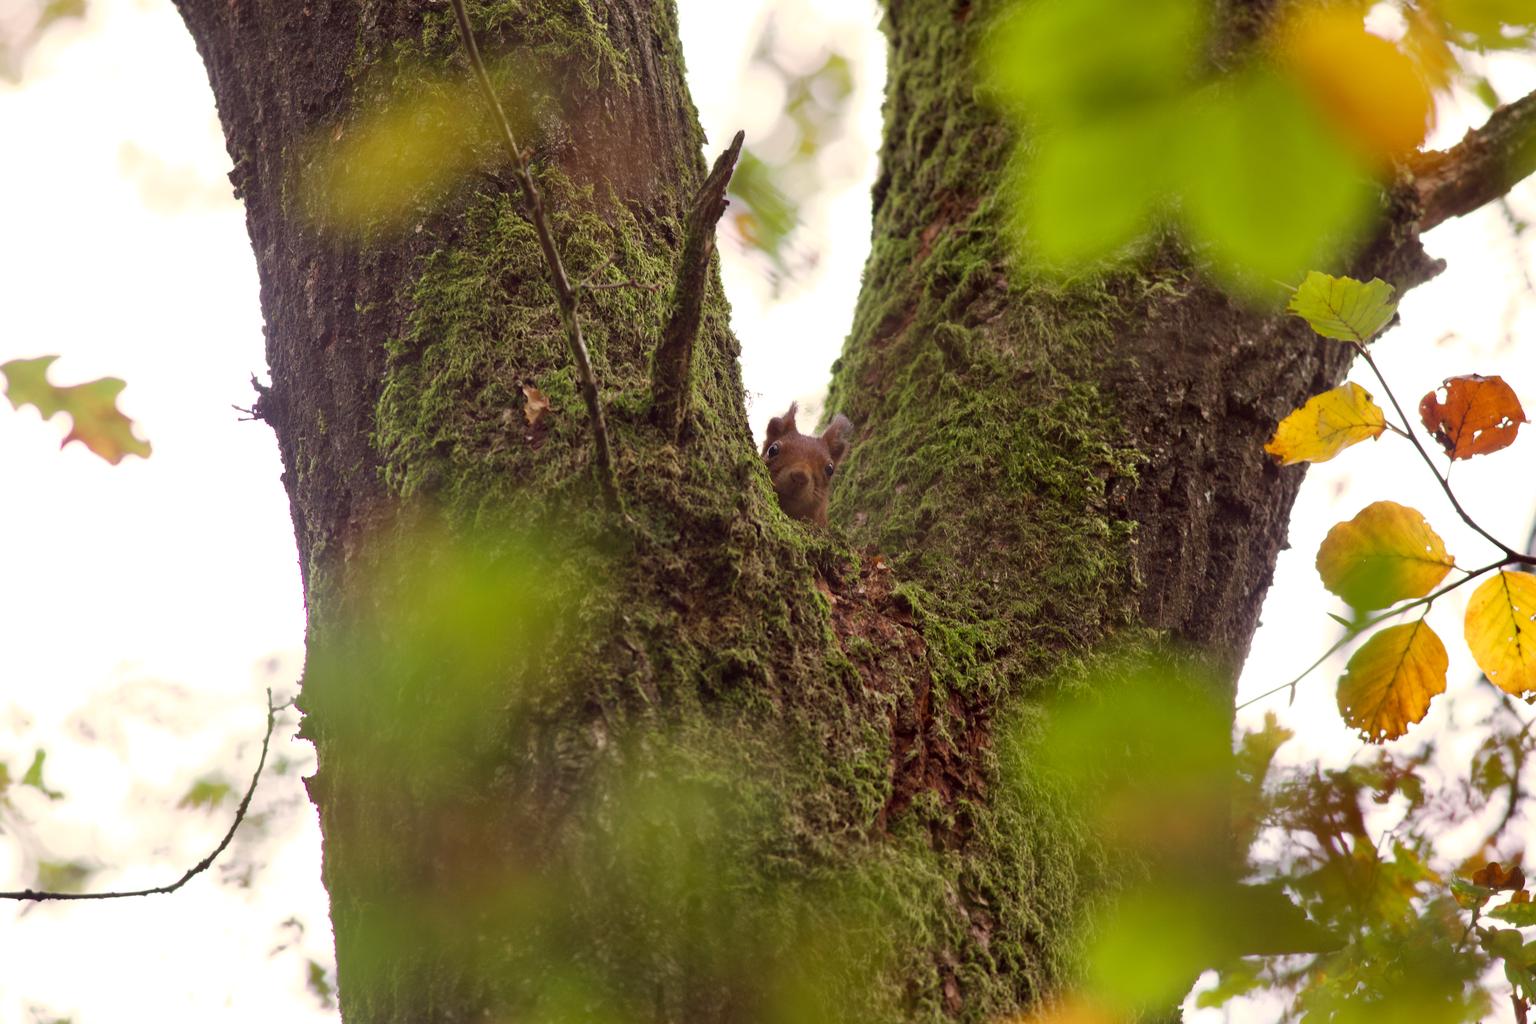 A curious red squirrel. Slightly annoited by the cold.